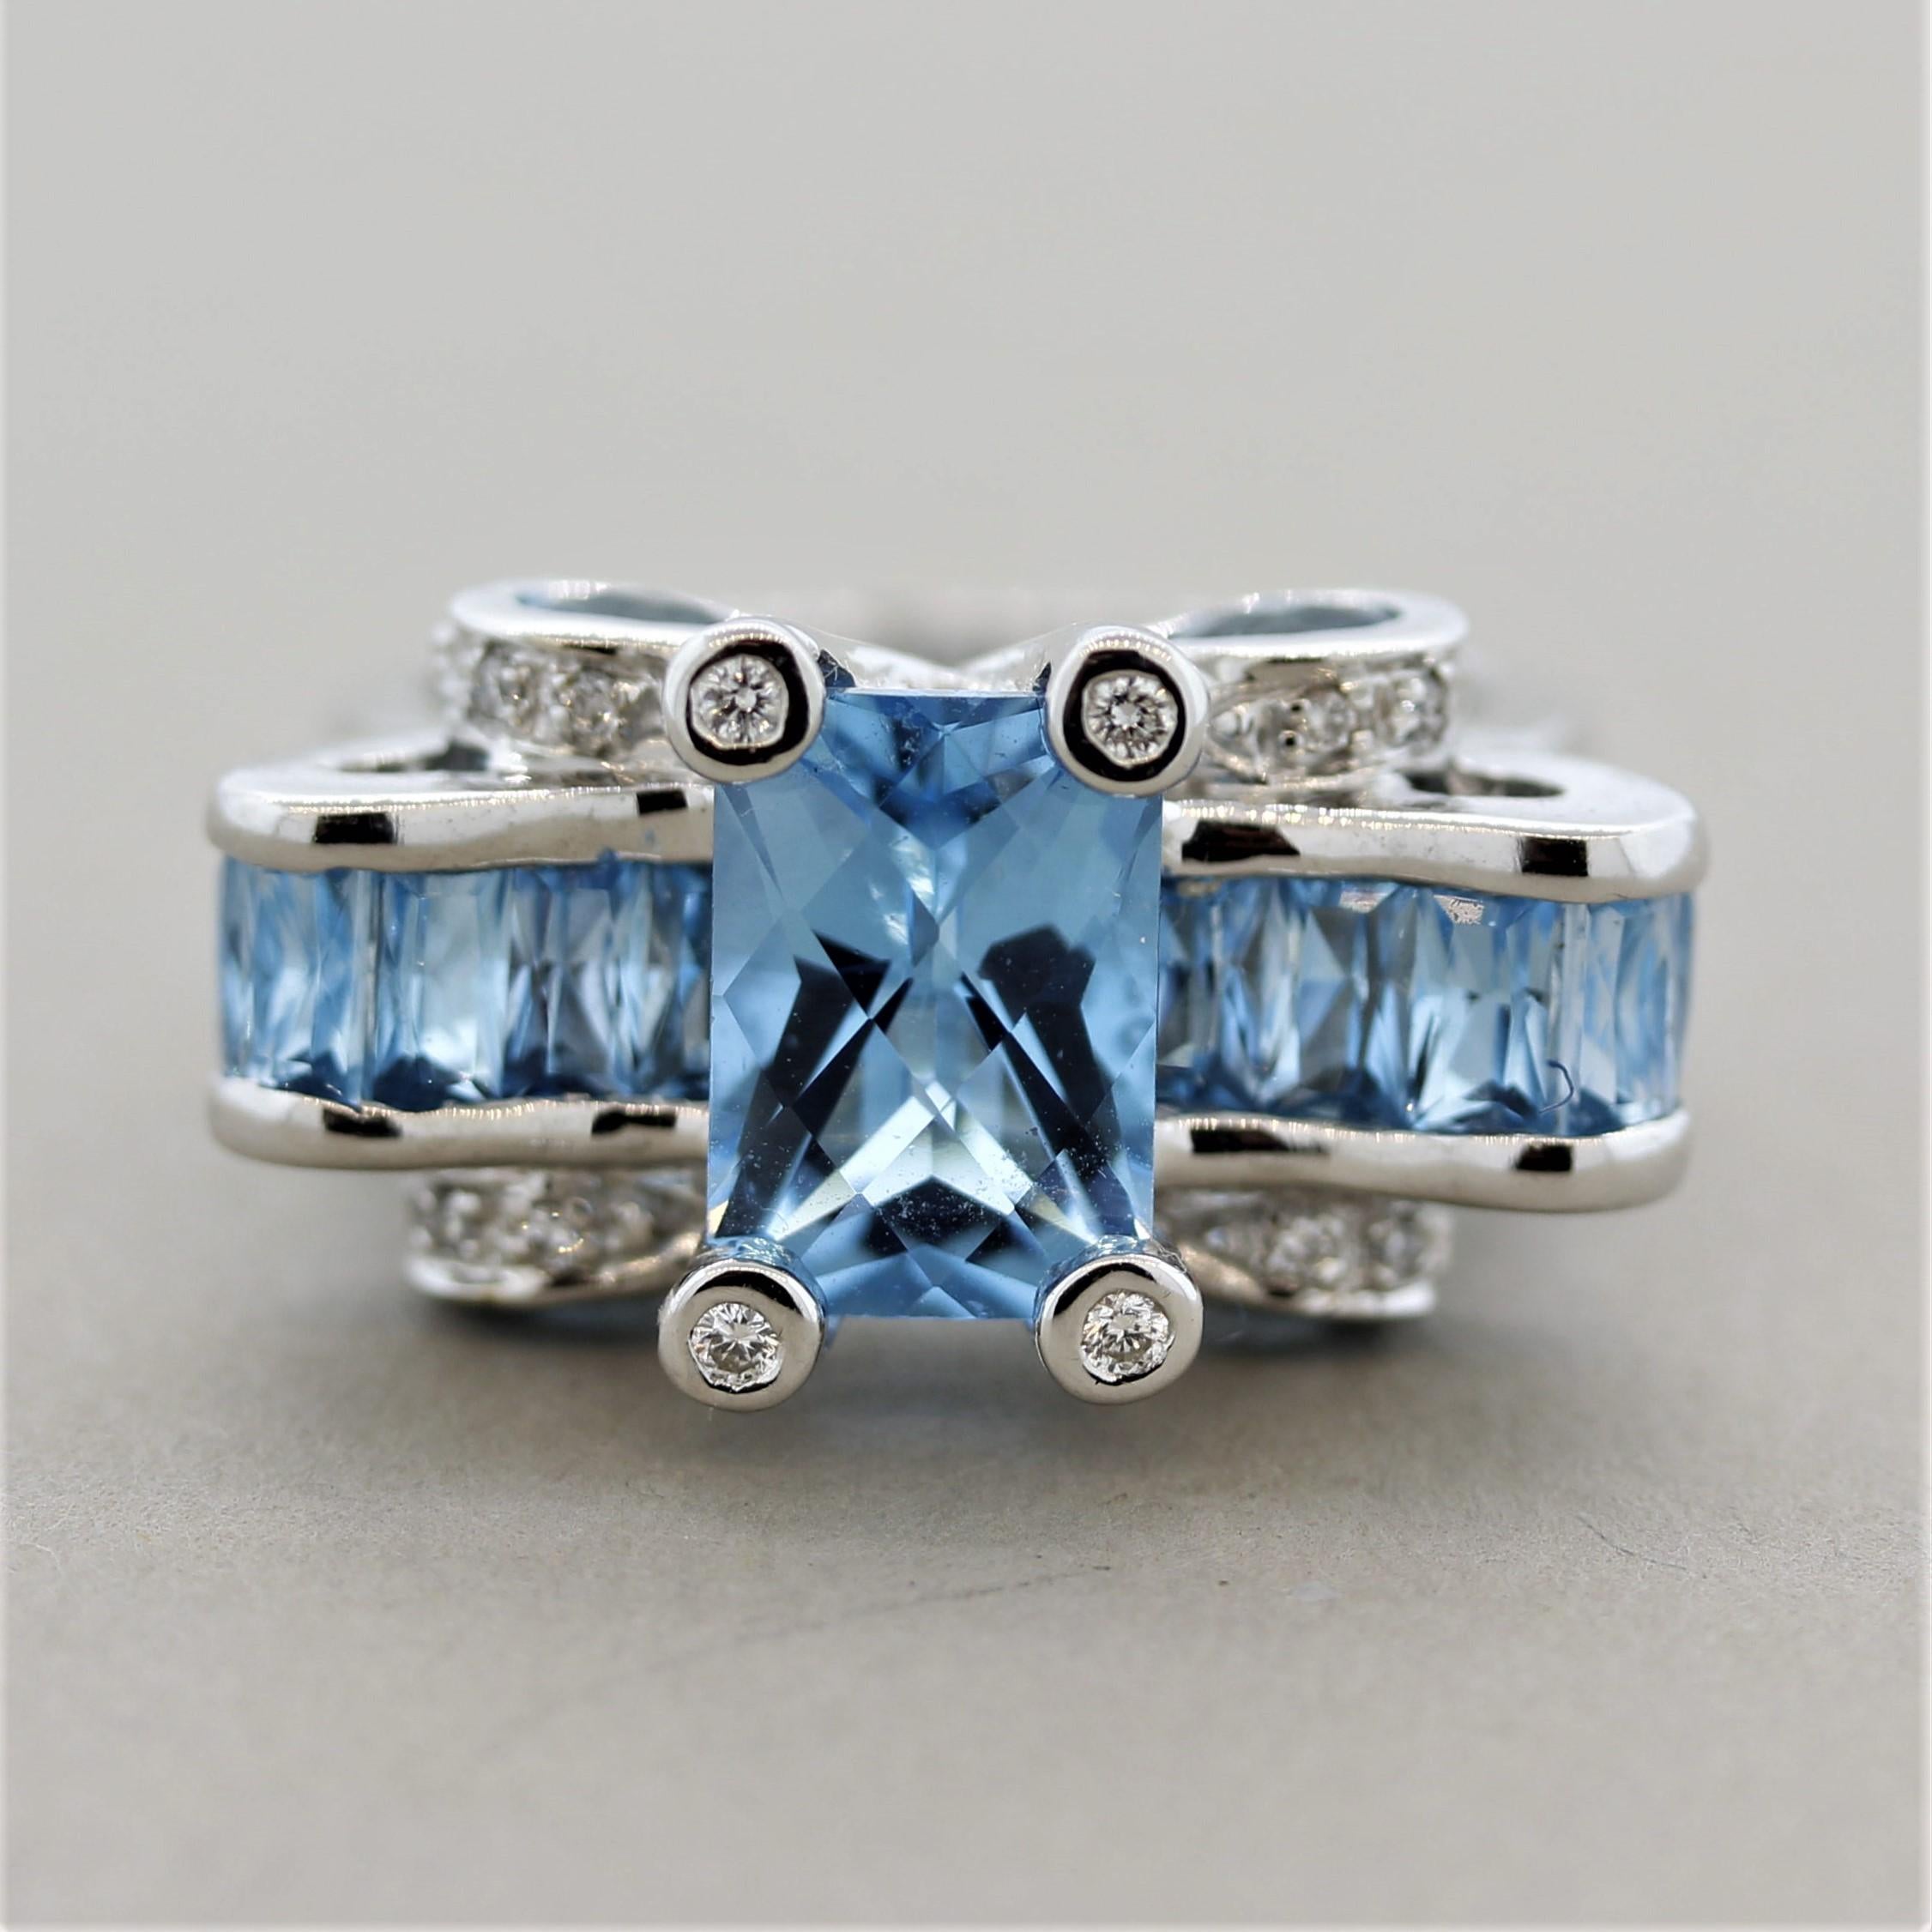 An original piece by Bellarri, it features 6.40 carats of bright Swiss blue topaz. They are accented by 0.09 carats of round brilliant cut diamonds which add brilliance and sparkle to the piece. Made in 18k white gold and ready to be your new